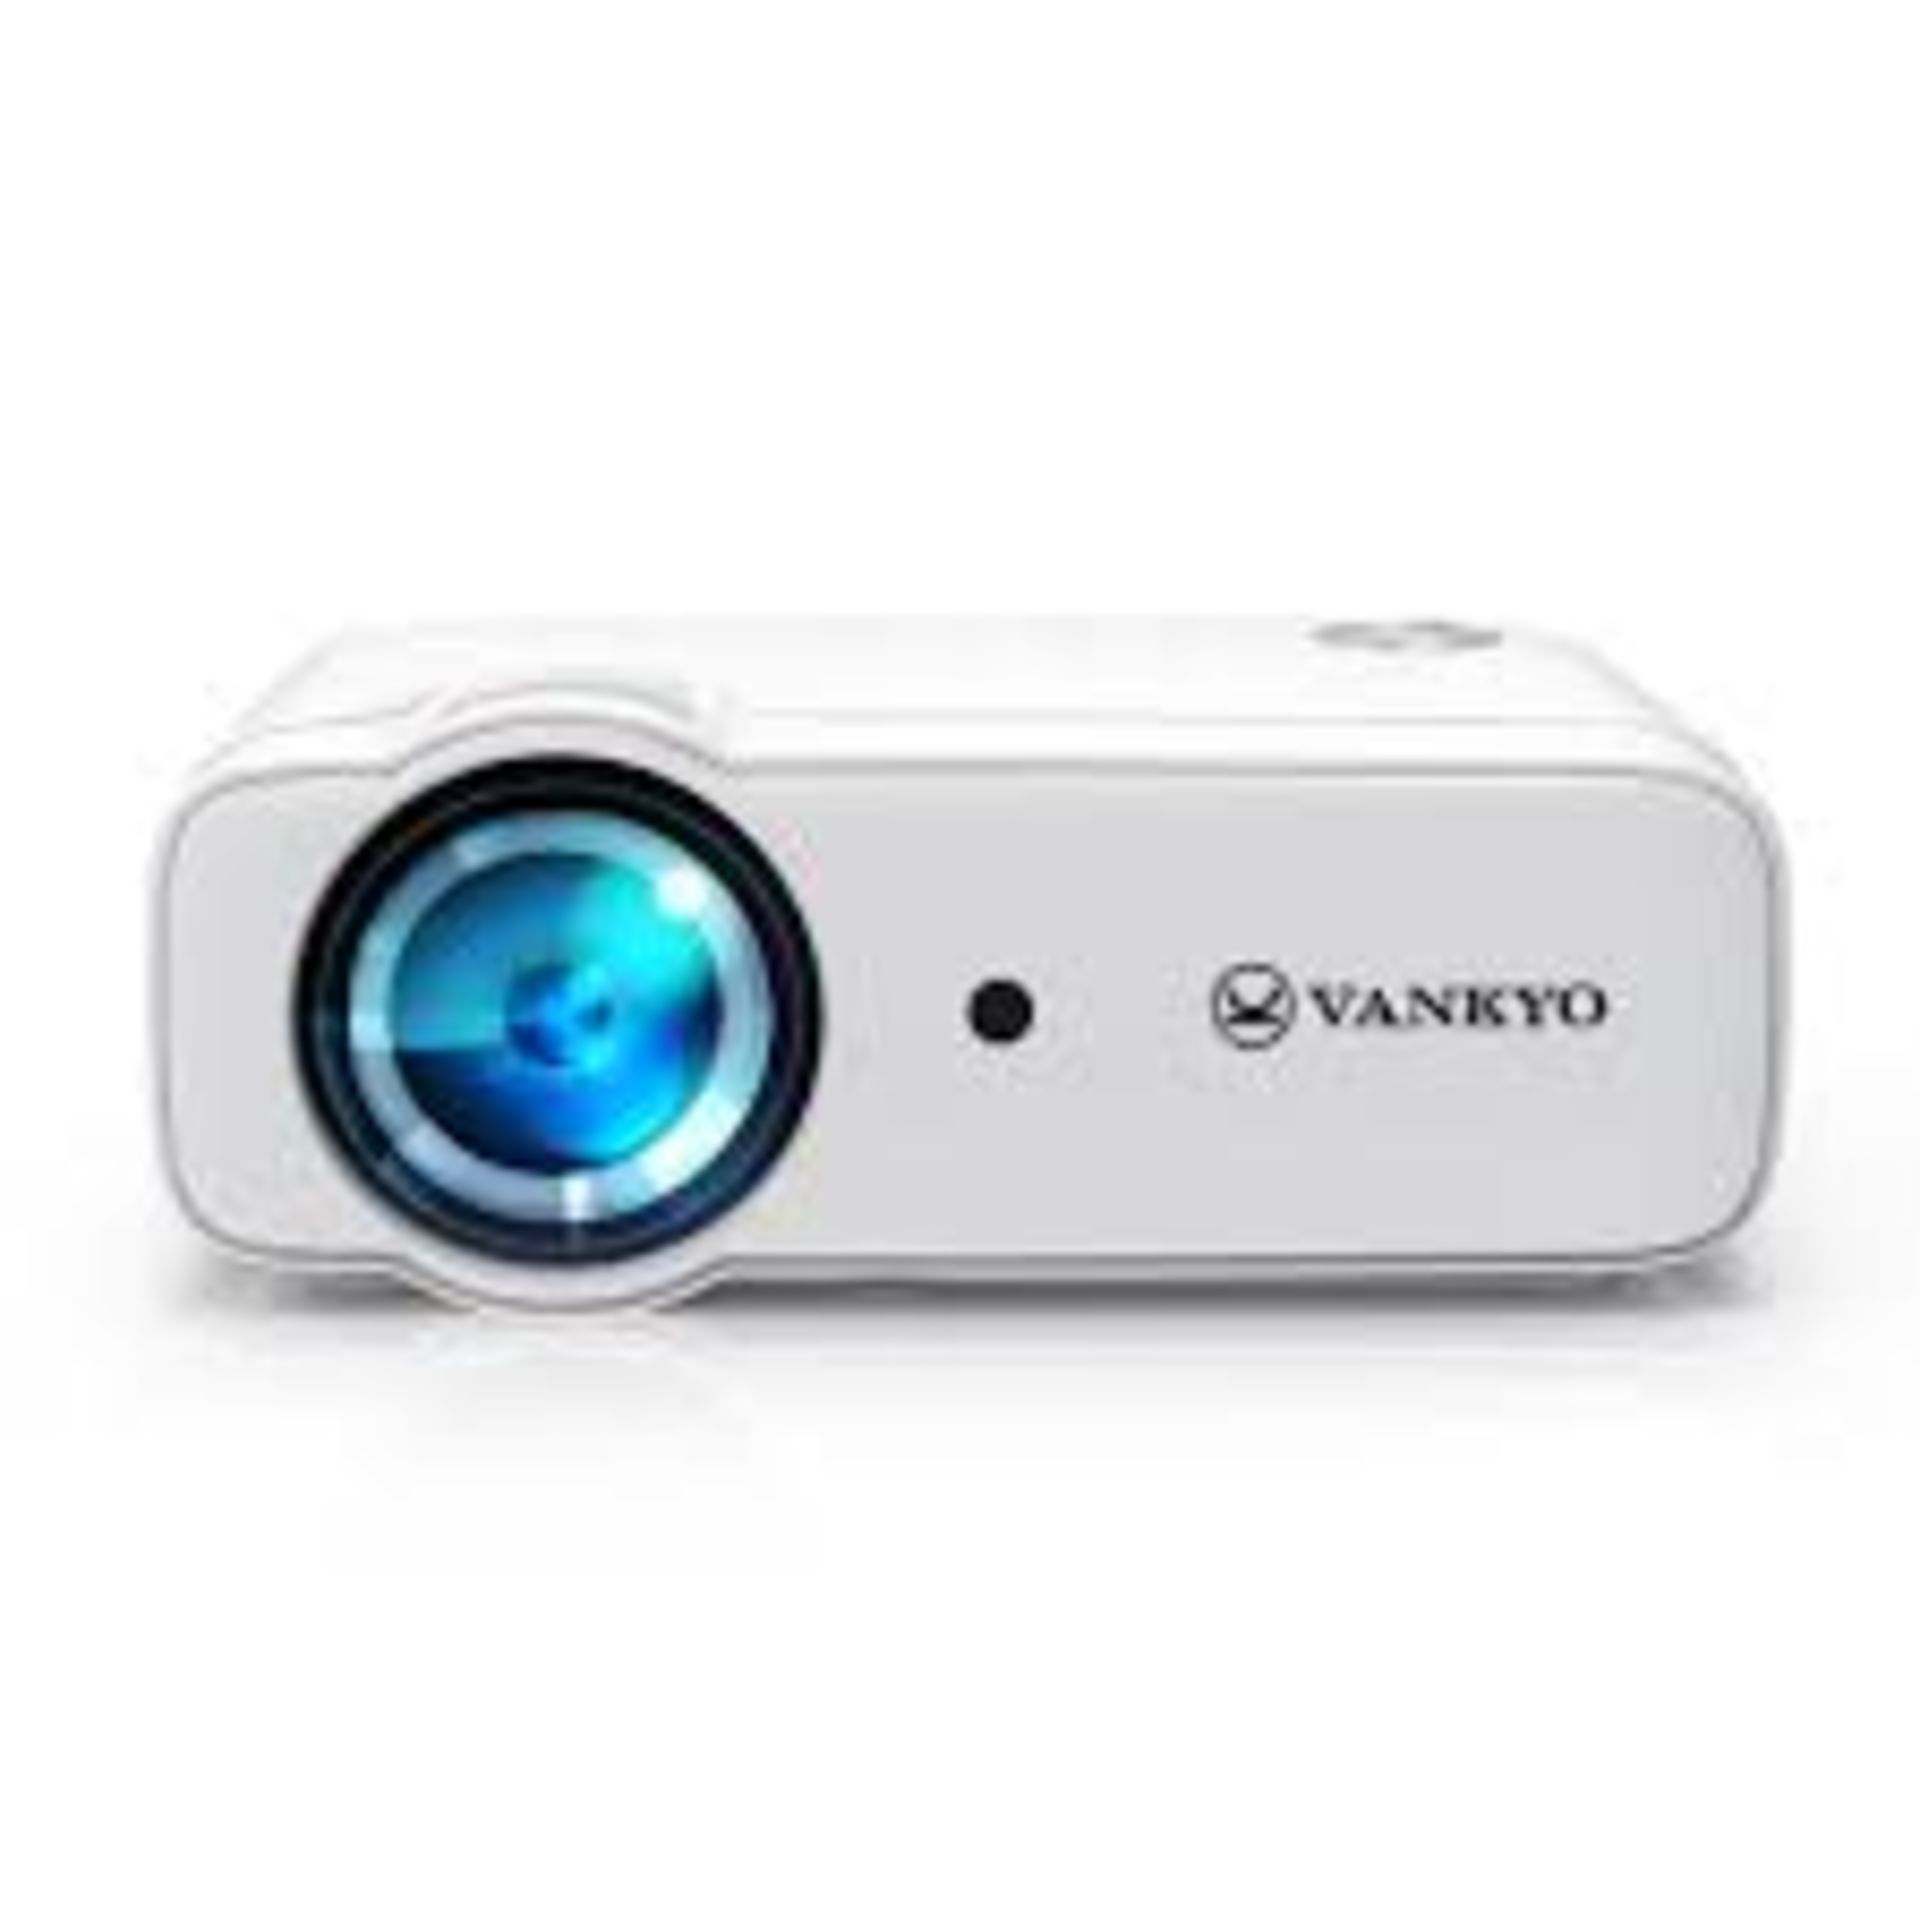 TRADE LOT 10 x New Boxed VANKYO Leisure 430 Mini Projector for Movie, Outdoor Entertainment,